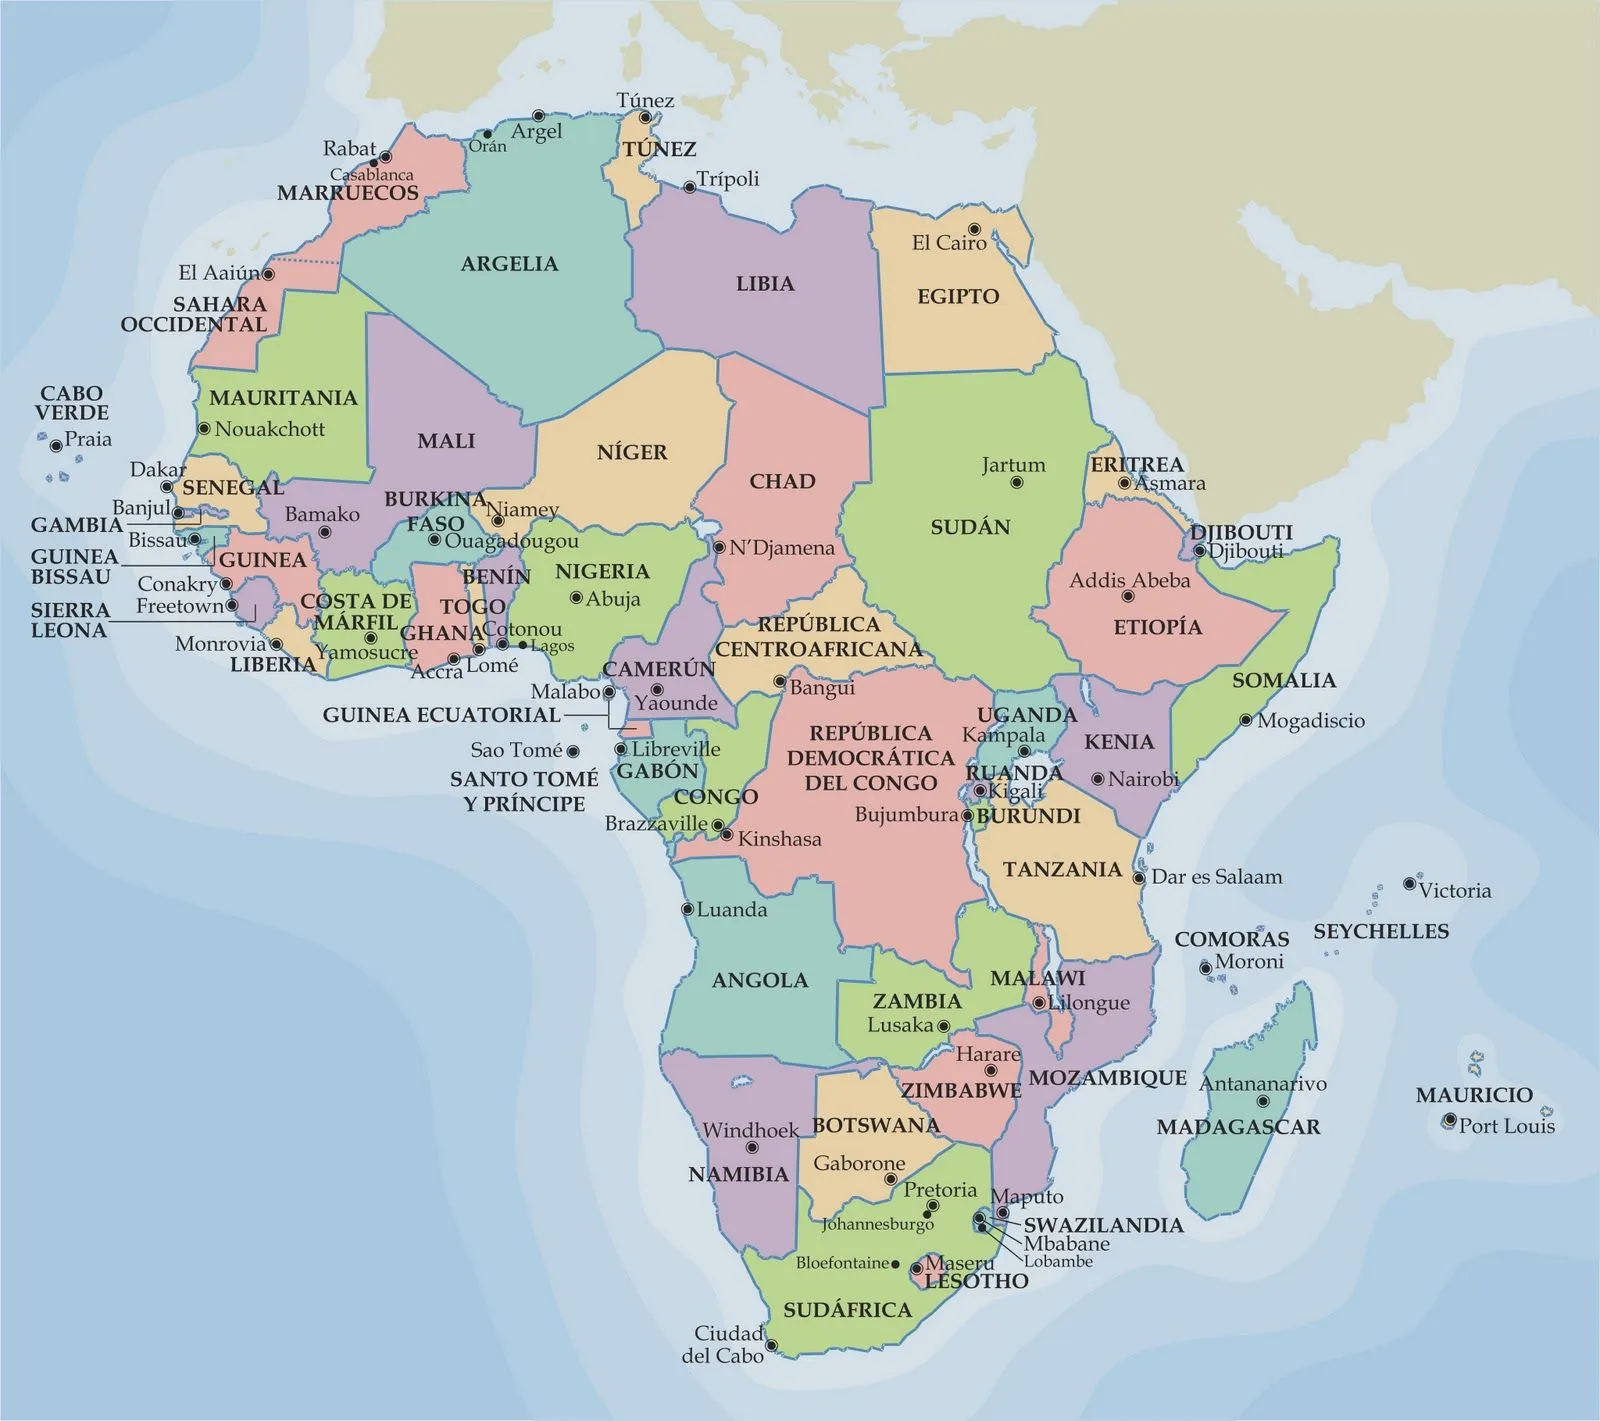 Geografía 3ºESO: Physical and political map of Africa